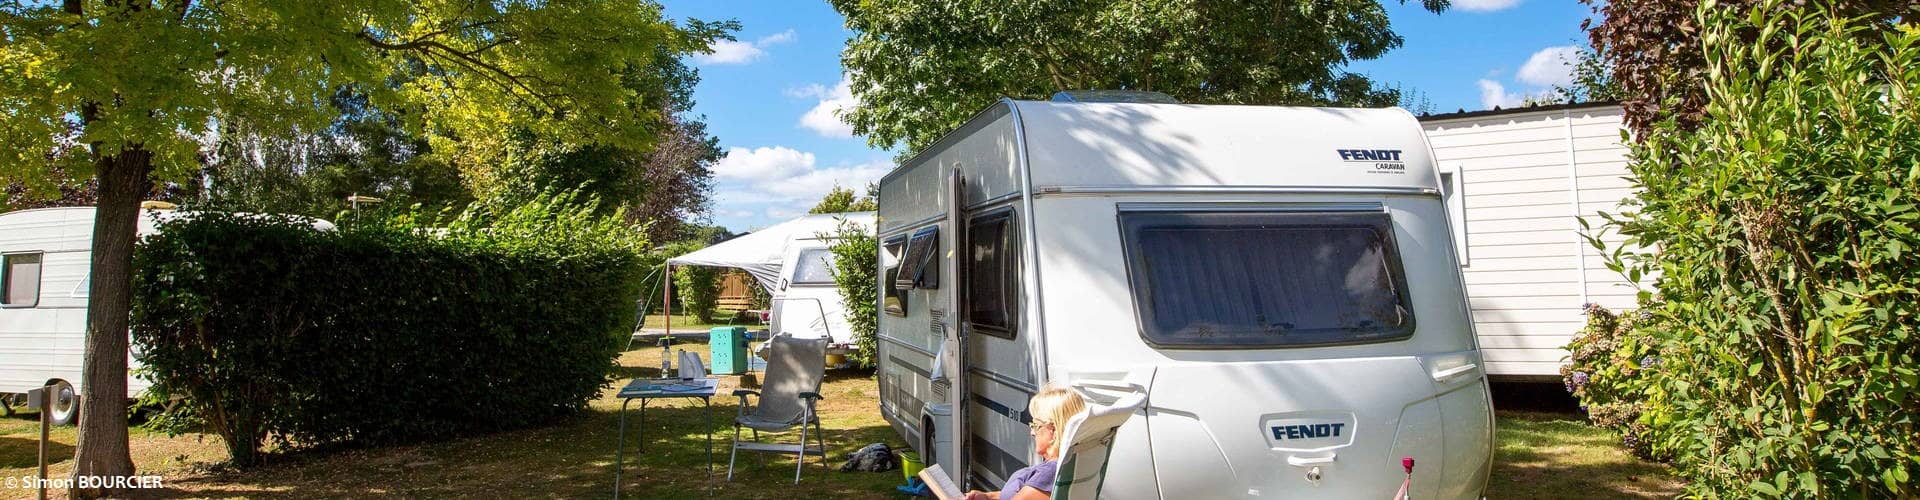 Camping pitches in Ille-et-Vilaine in Brittany